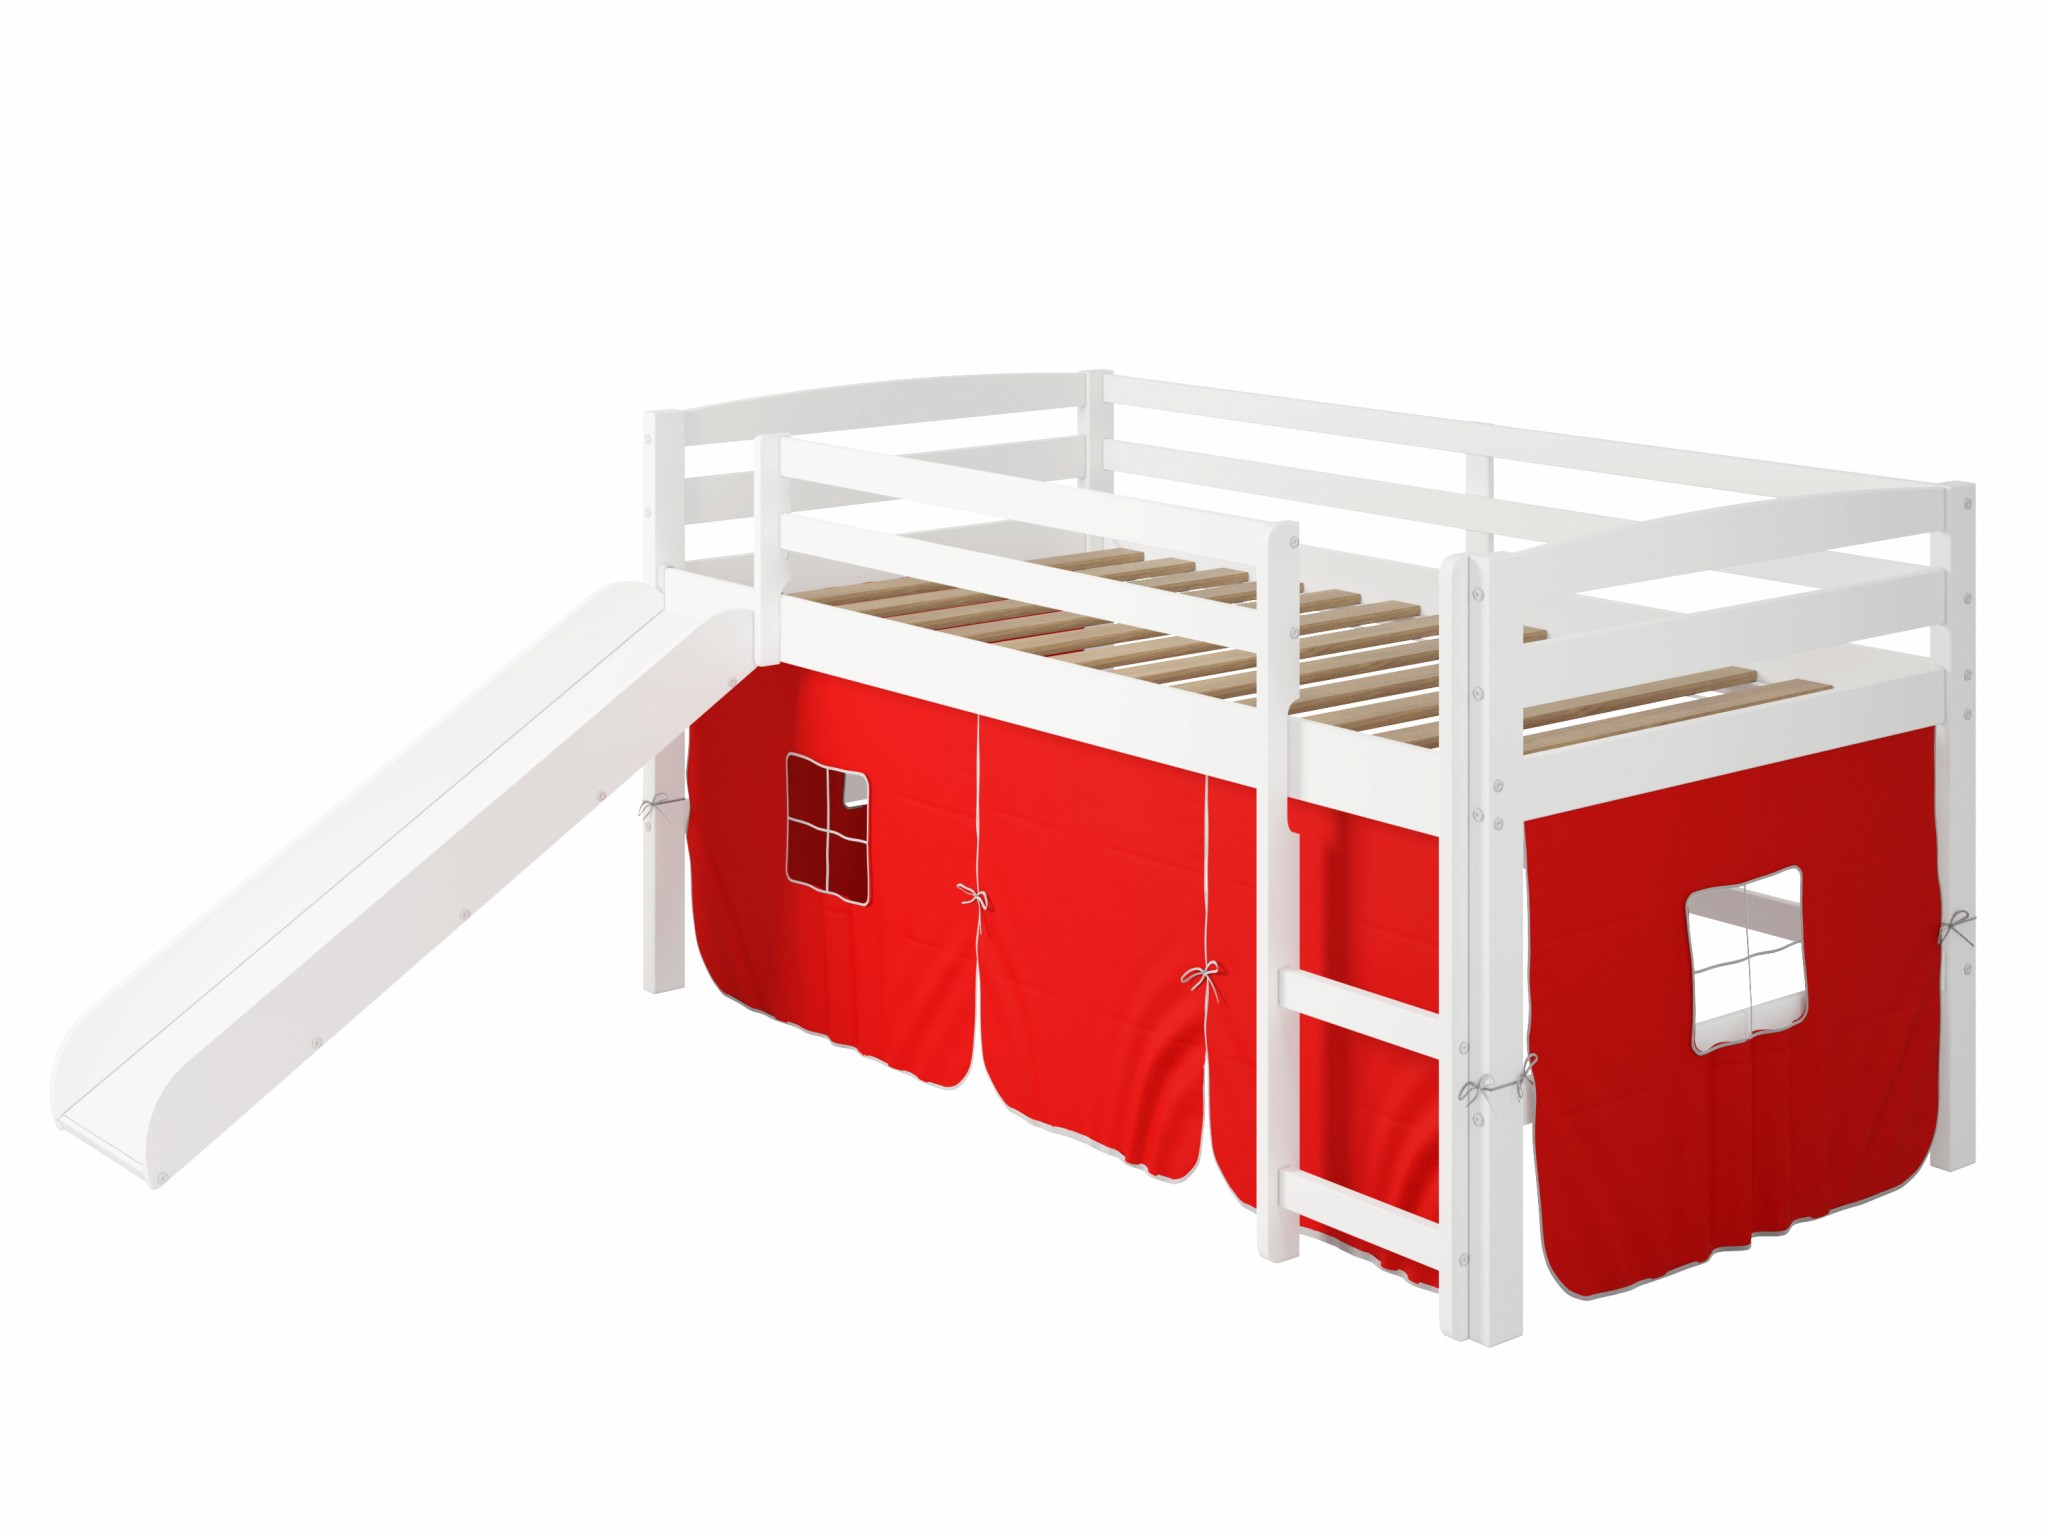 41" X 81" X 46" White Solid Pine Red Tent Loft Bed with Slide and Ladder